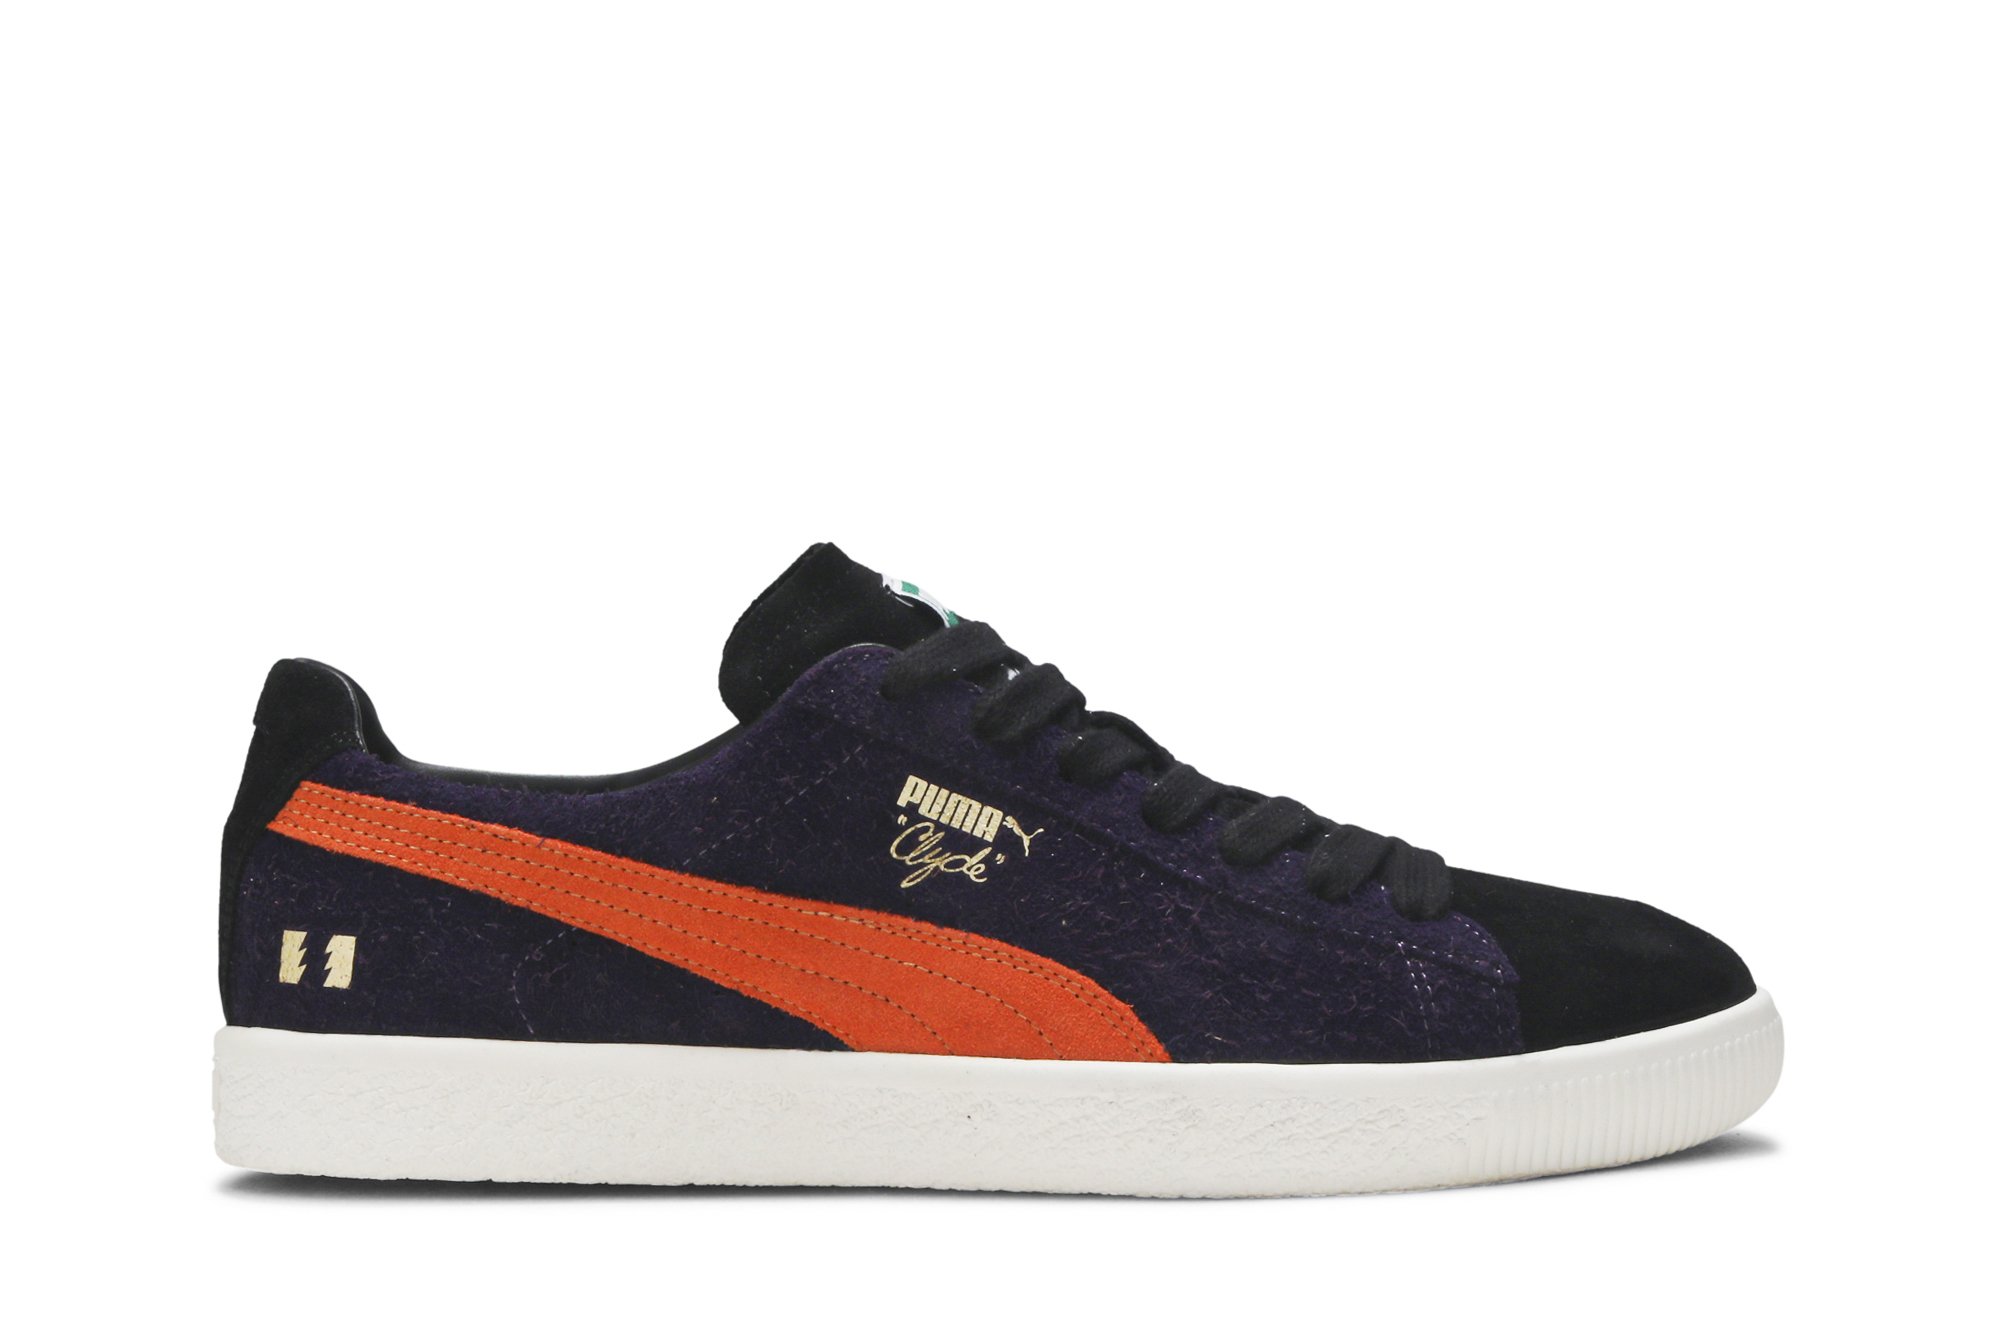 Buy The Hundreds x Clyde 'Decades' - 372944 01 | GOAT